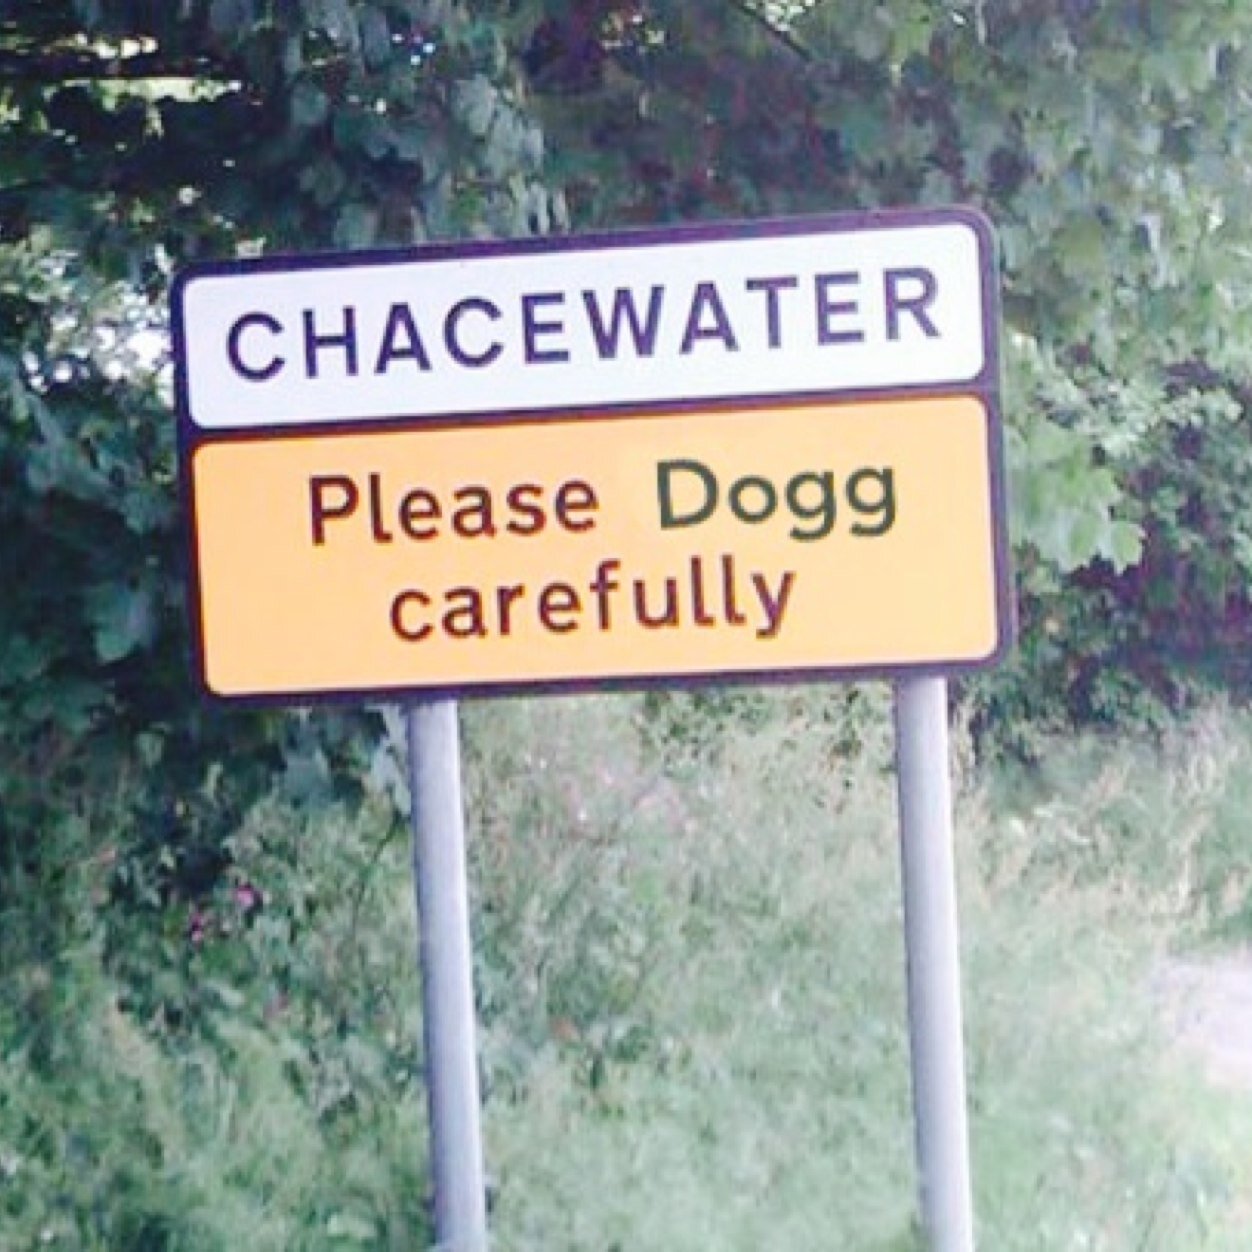 Chacewater Dogging Club, Cornwall's Dogging Elite! #ChacewaterDoggers #Dogginurno #doggers #dogging #Cornwall